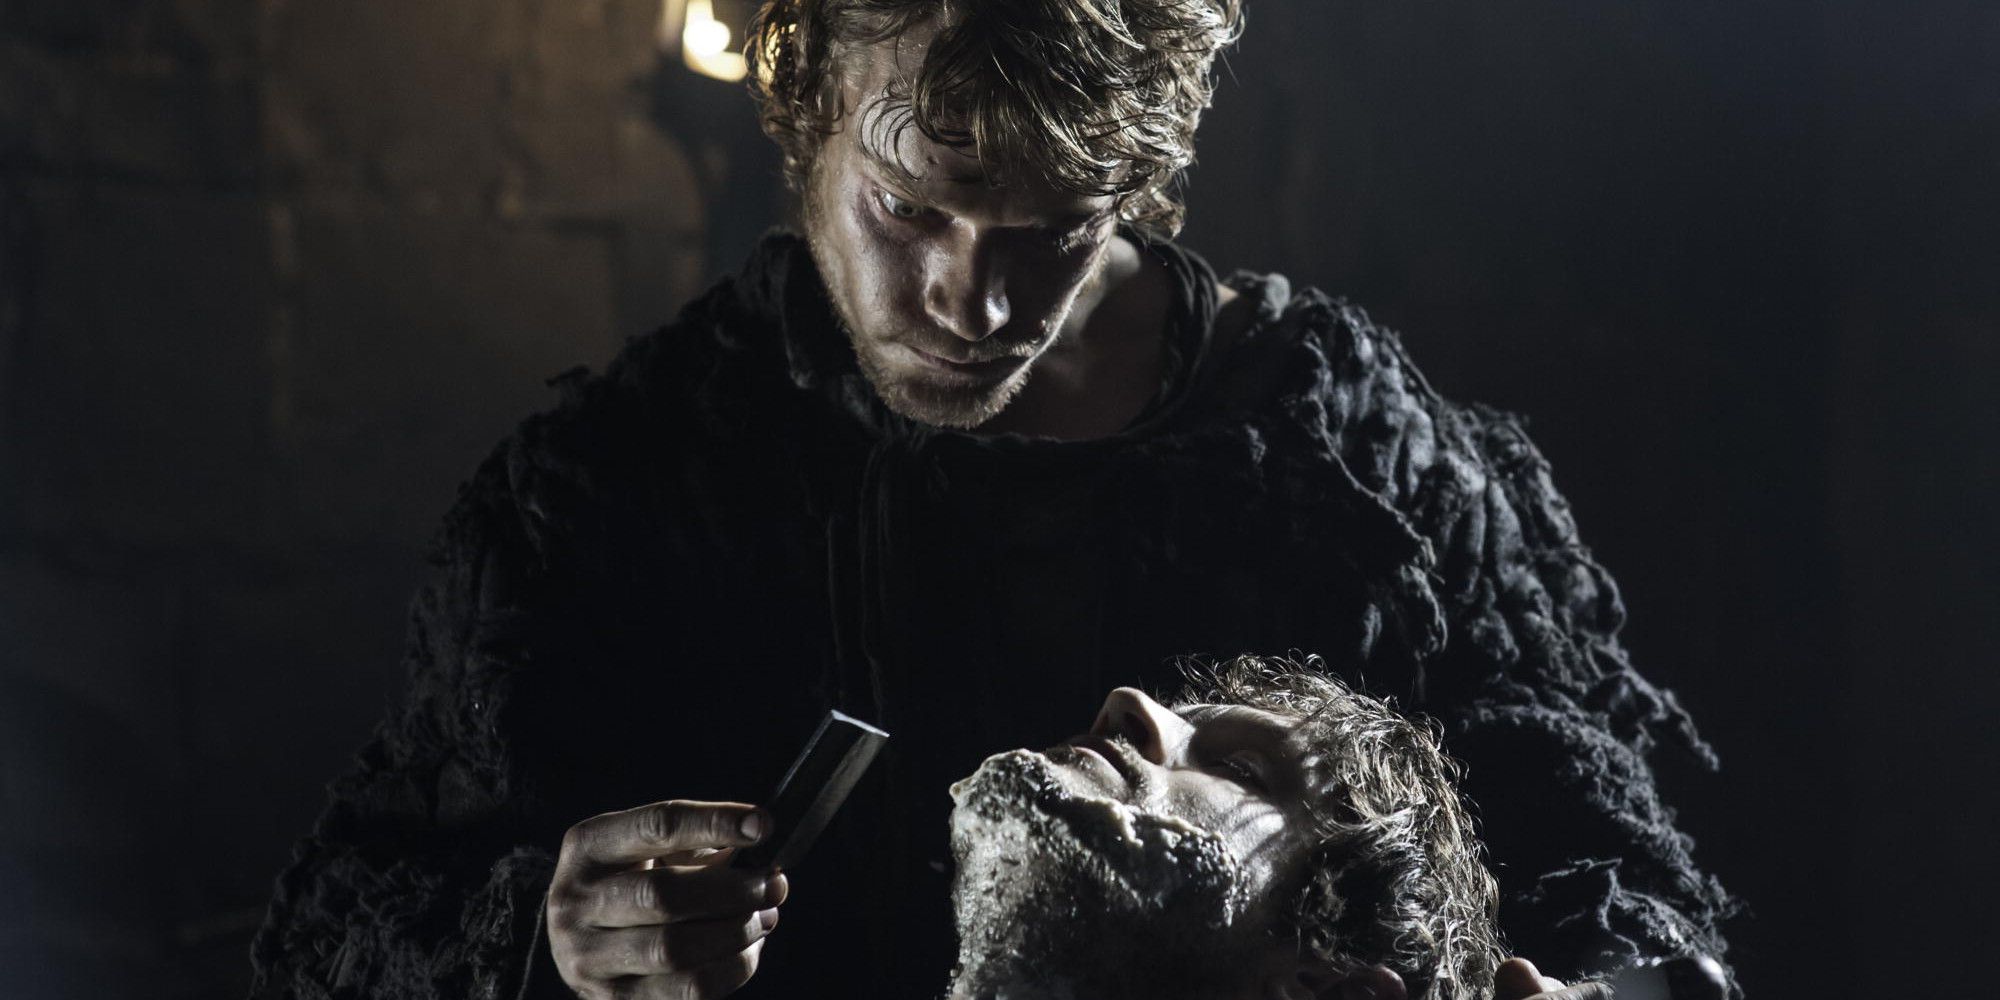 Theon gives Ramsay a shave